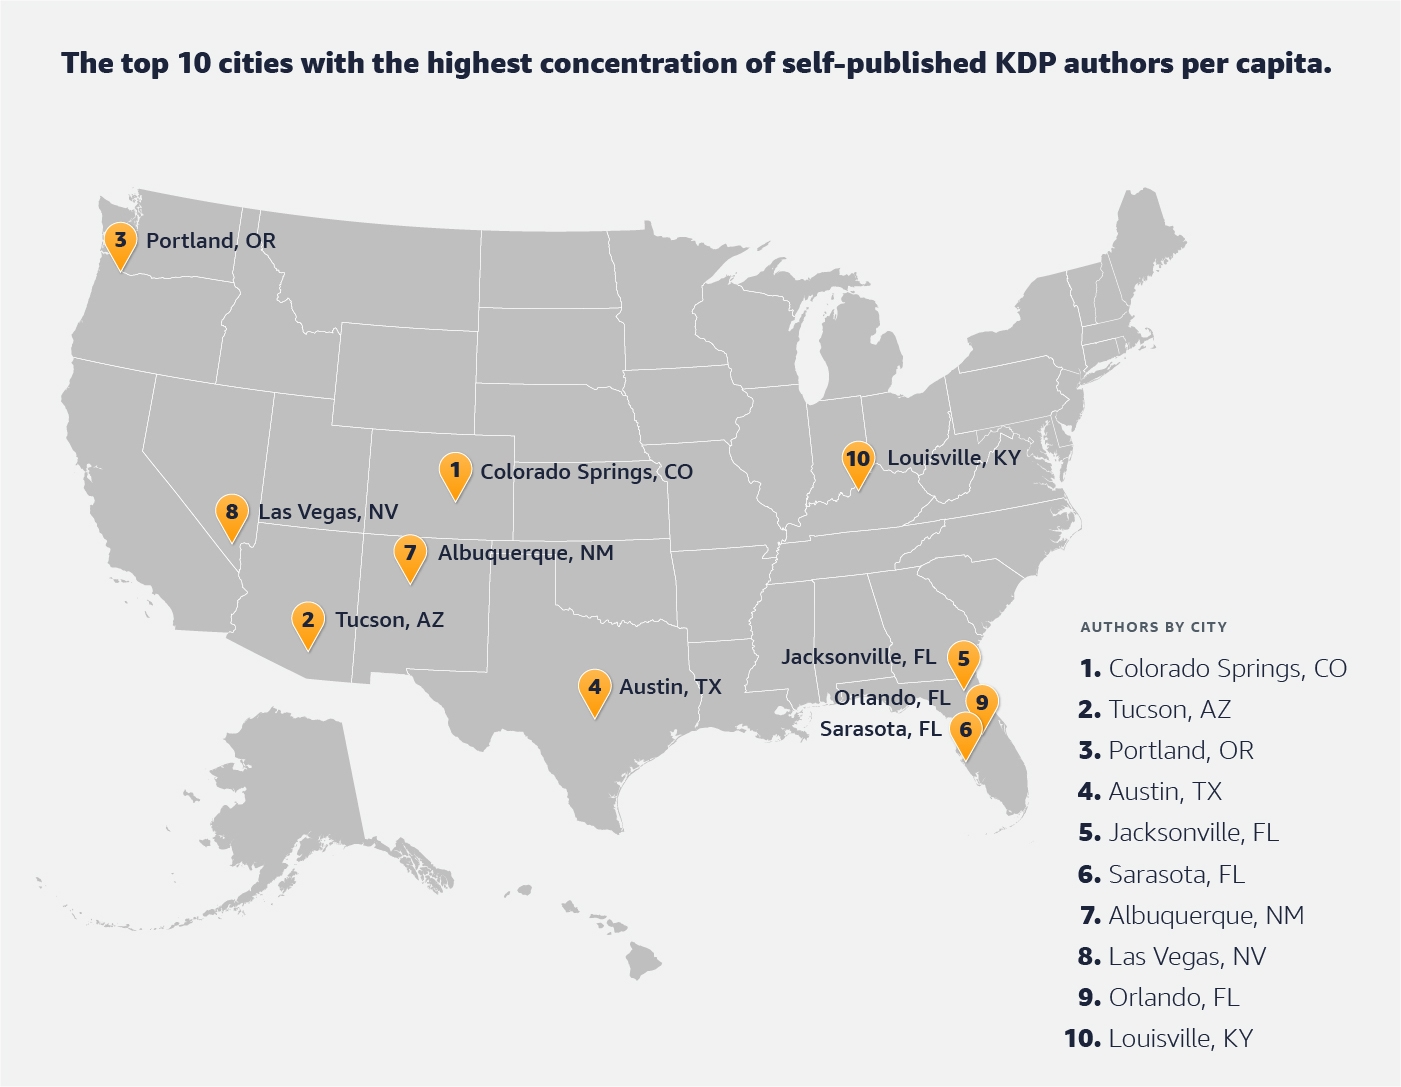 Map of the United States showing top Kindle Direct Publishing locations